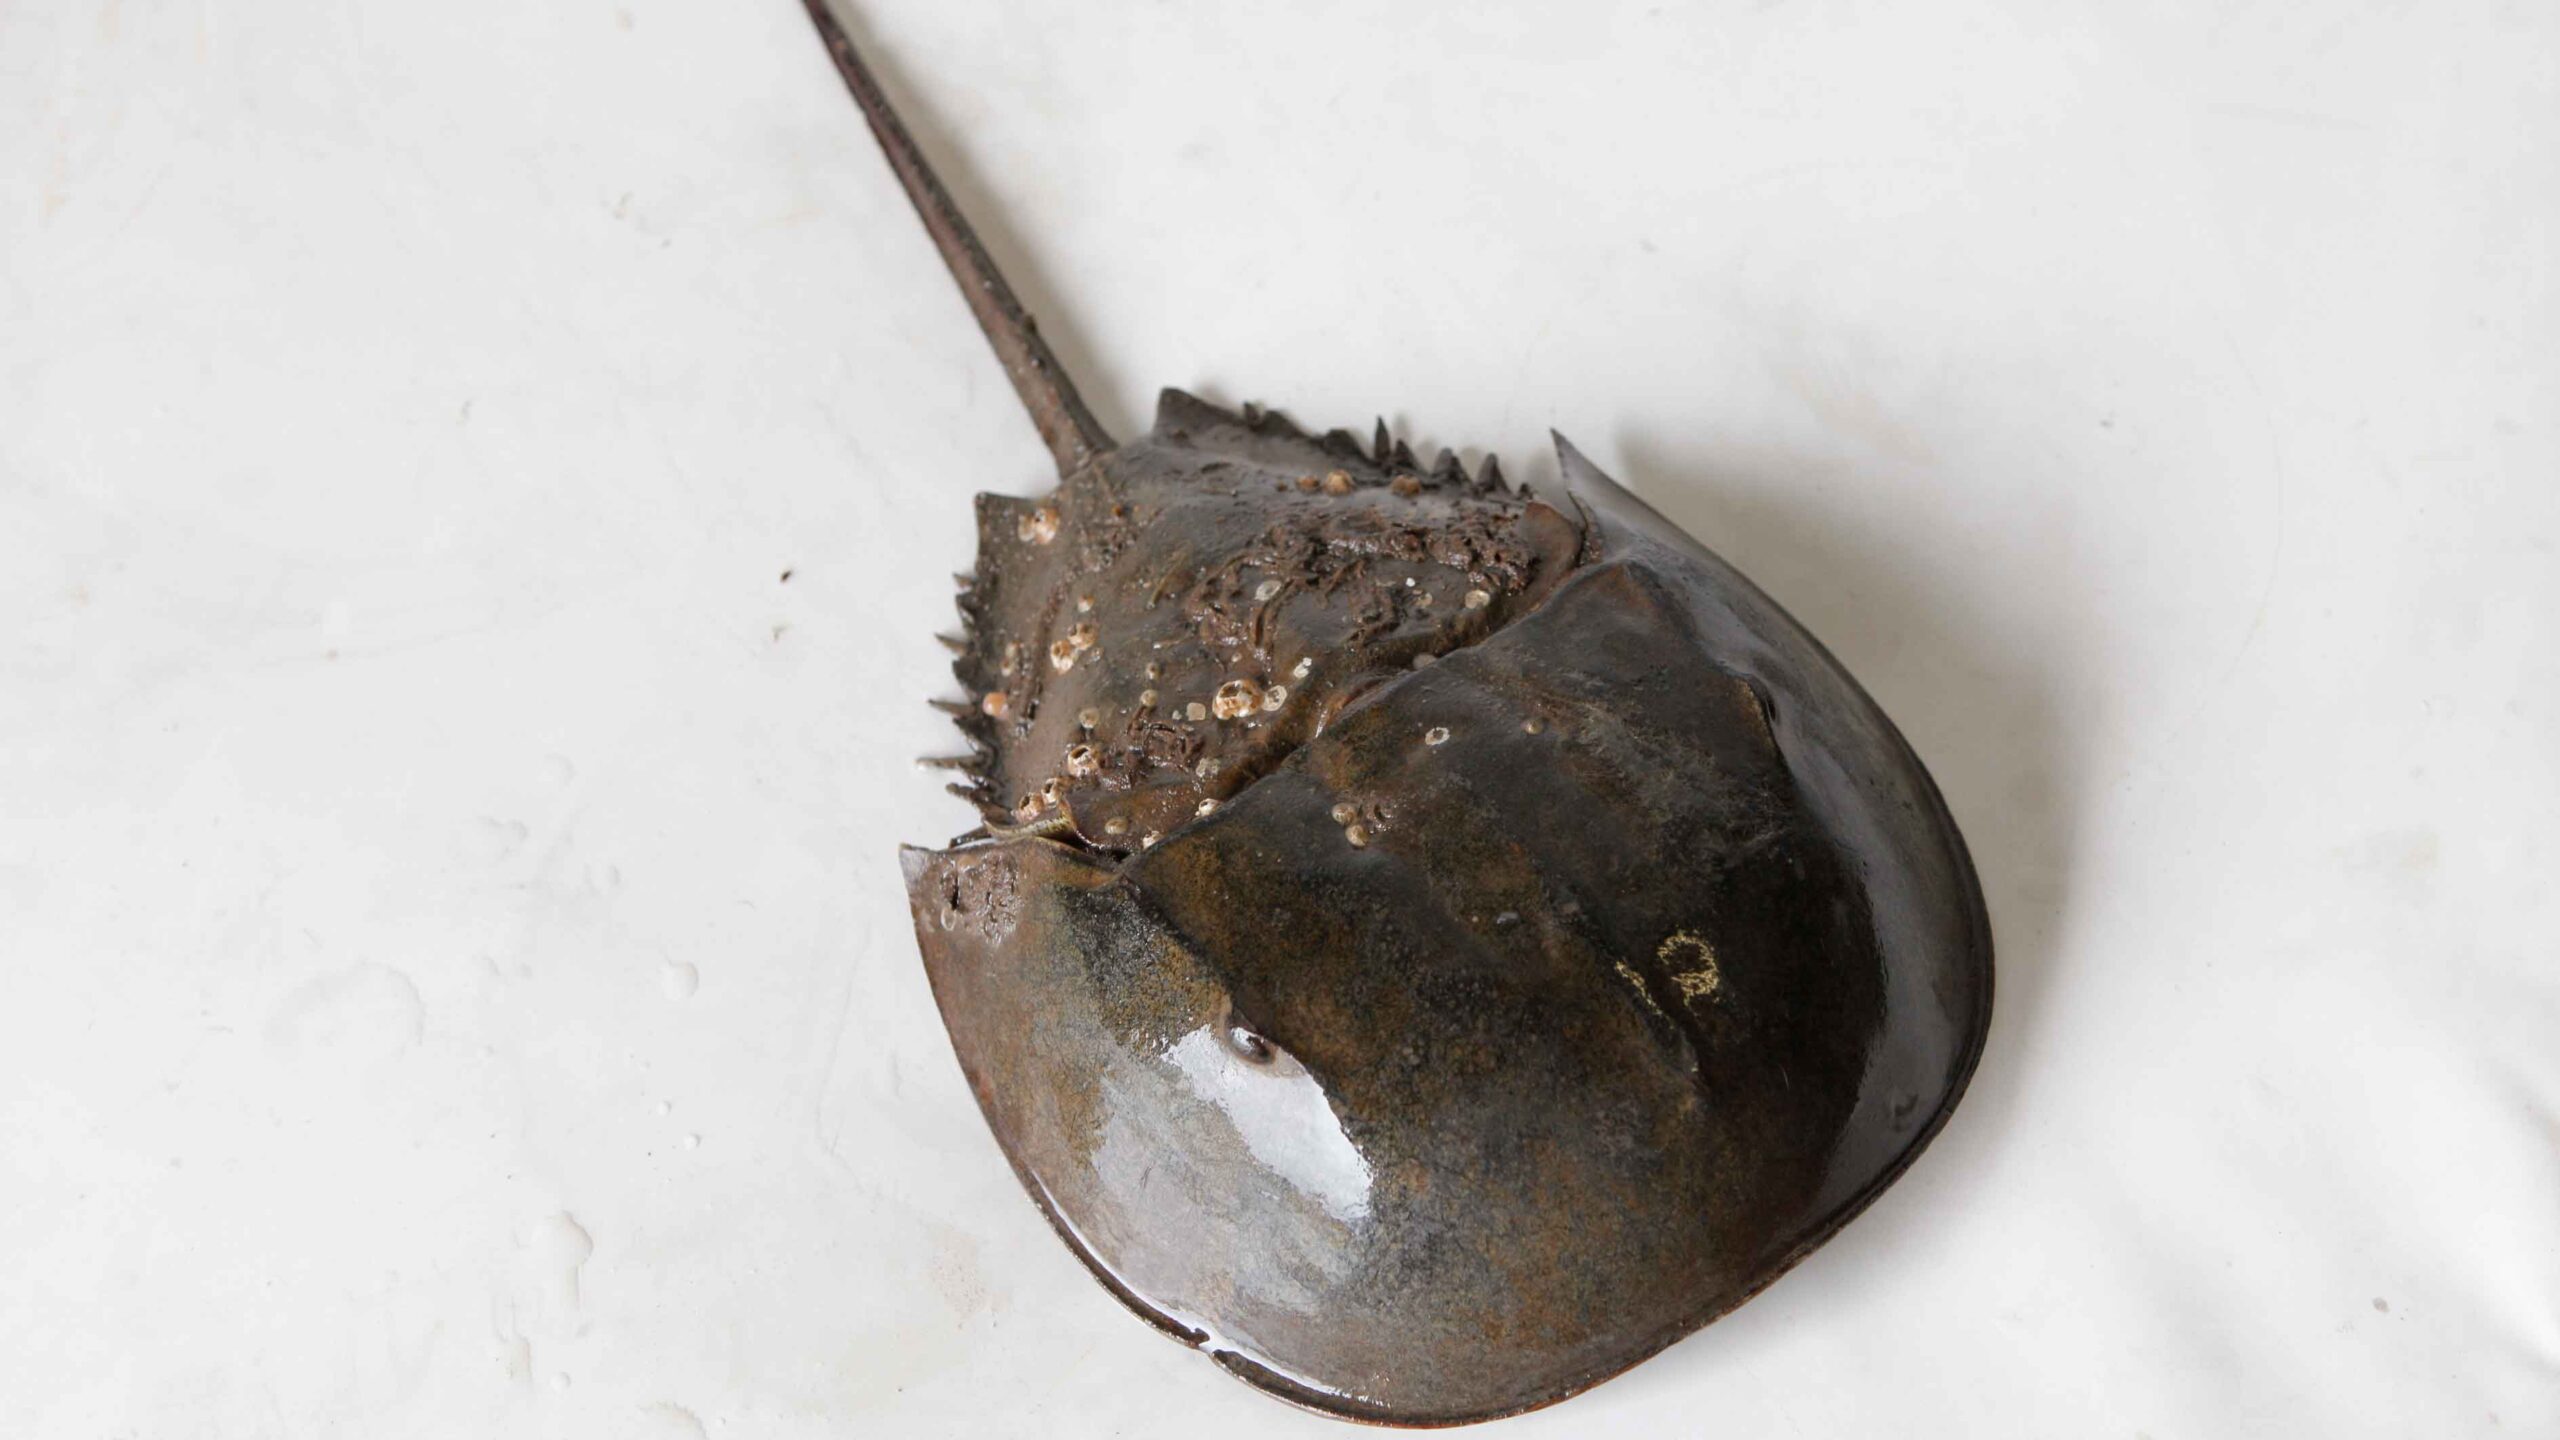 A brown horseshoe crab with a long pointed tail and a half-circle body